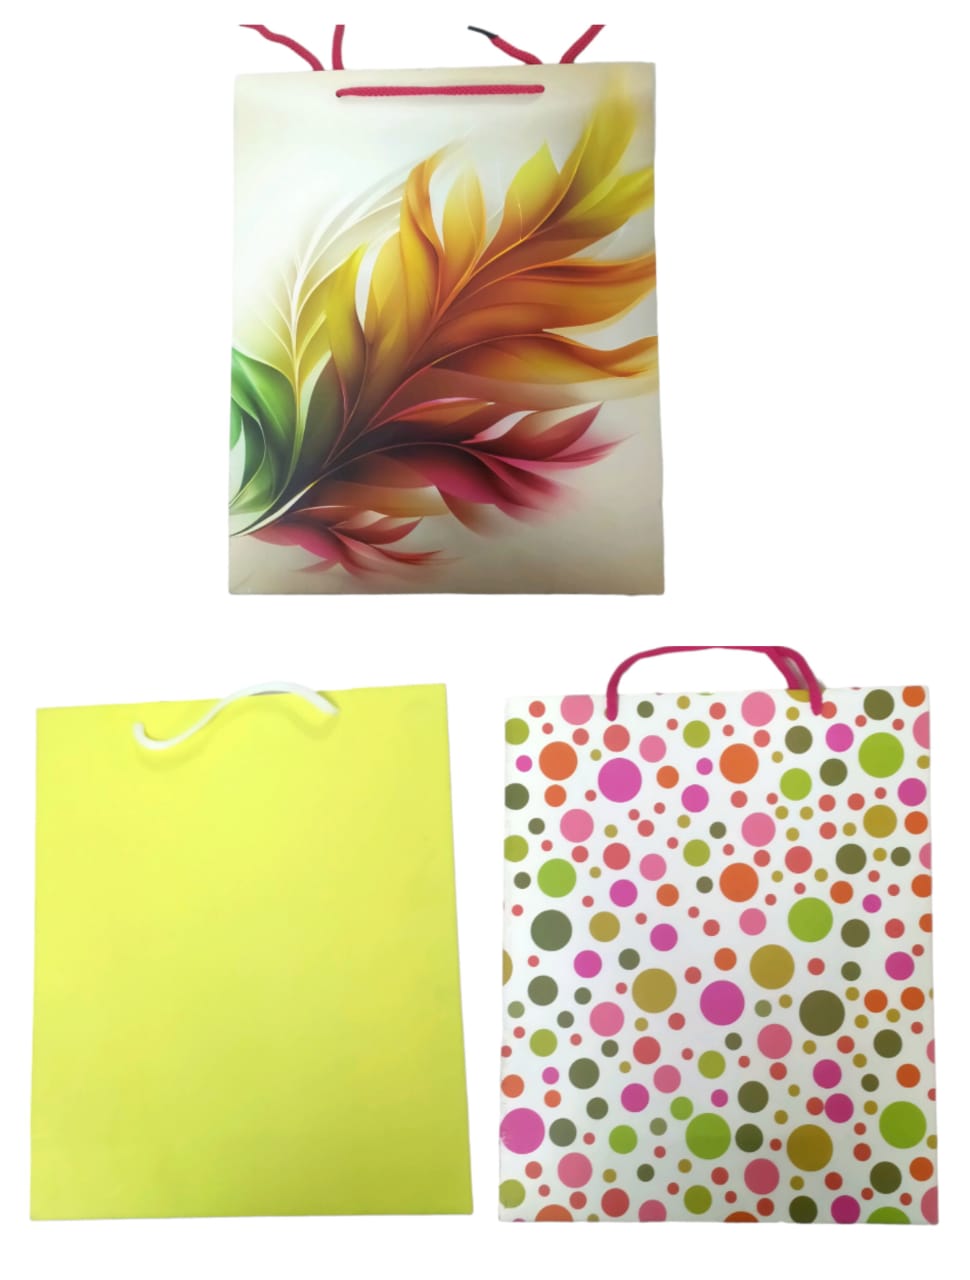 DIGISMART* Paper Bags for Return Gifts - Paper Gift Bag - Medium Carry Bags for Gifting - Paper Bags - Medium Paper Bags -Goodie Bags with Tissue and Thank You Card - Gift Covers - Pack Of 1